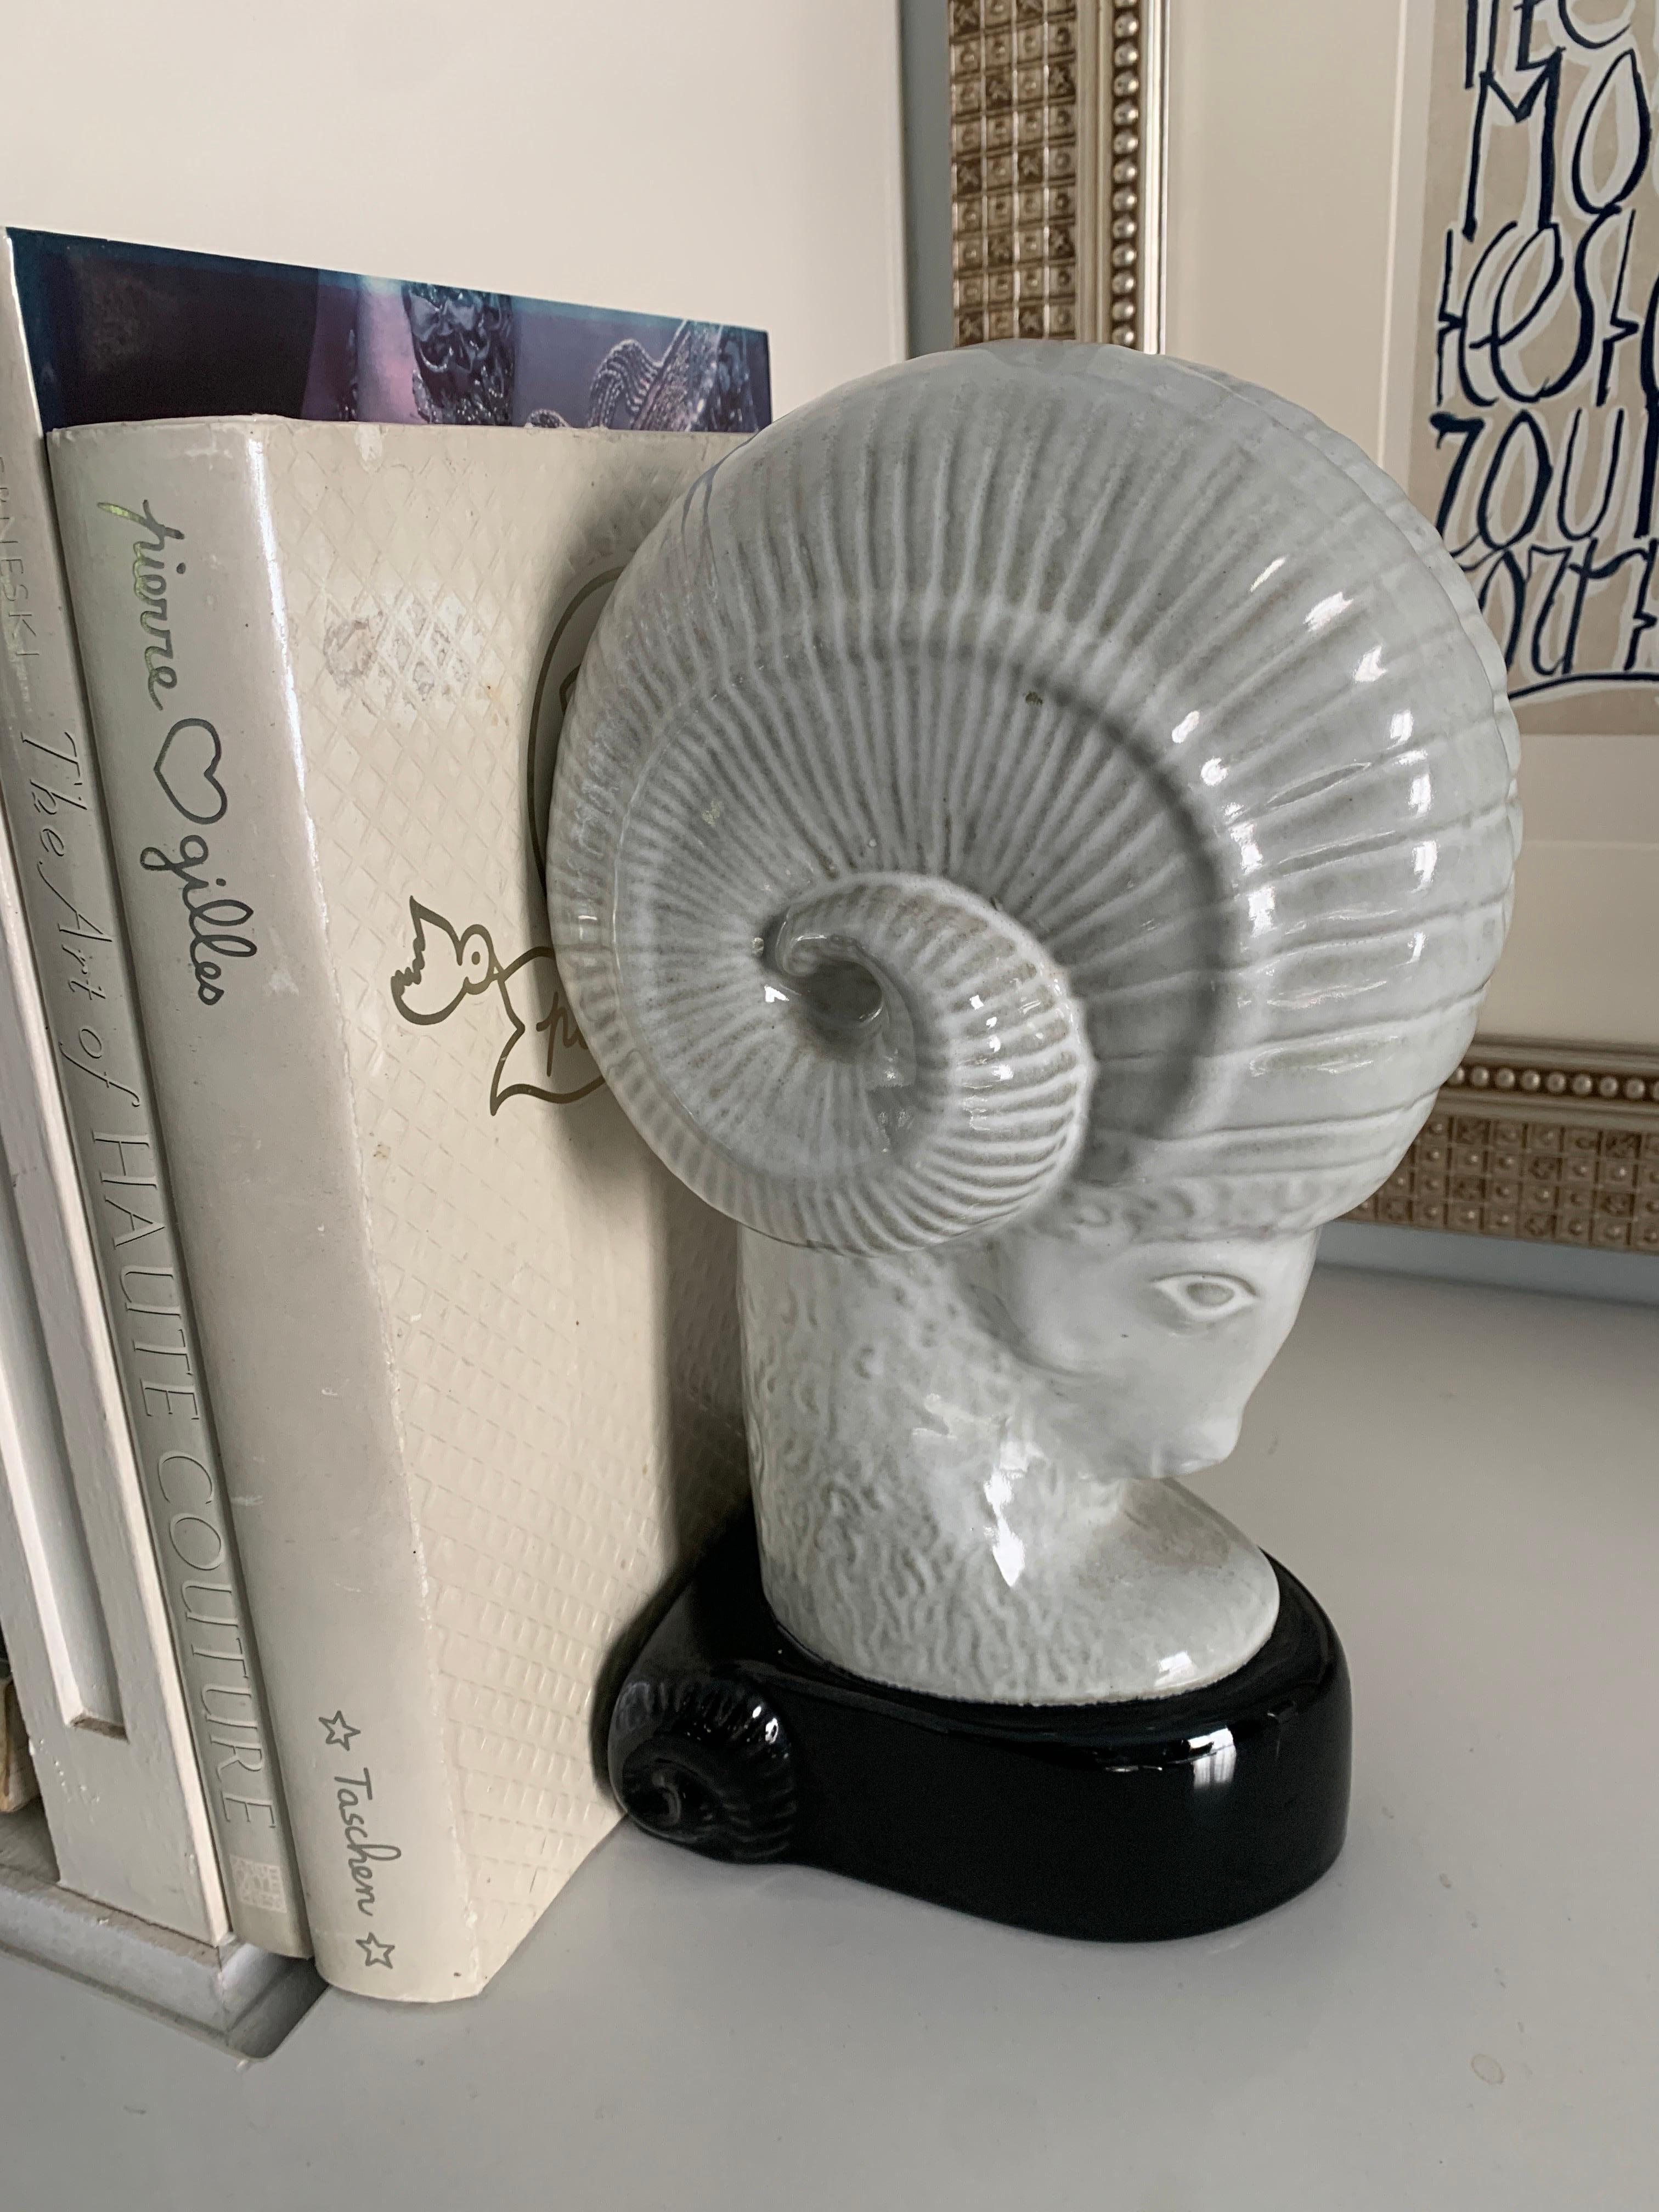 A very nice and large sculpture of a Rams Head - perfectly suited as a bookend for large books, or a Stand-alone decorative piece. No Chips or Cracks.